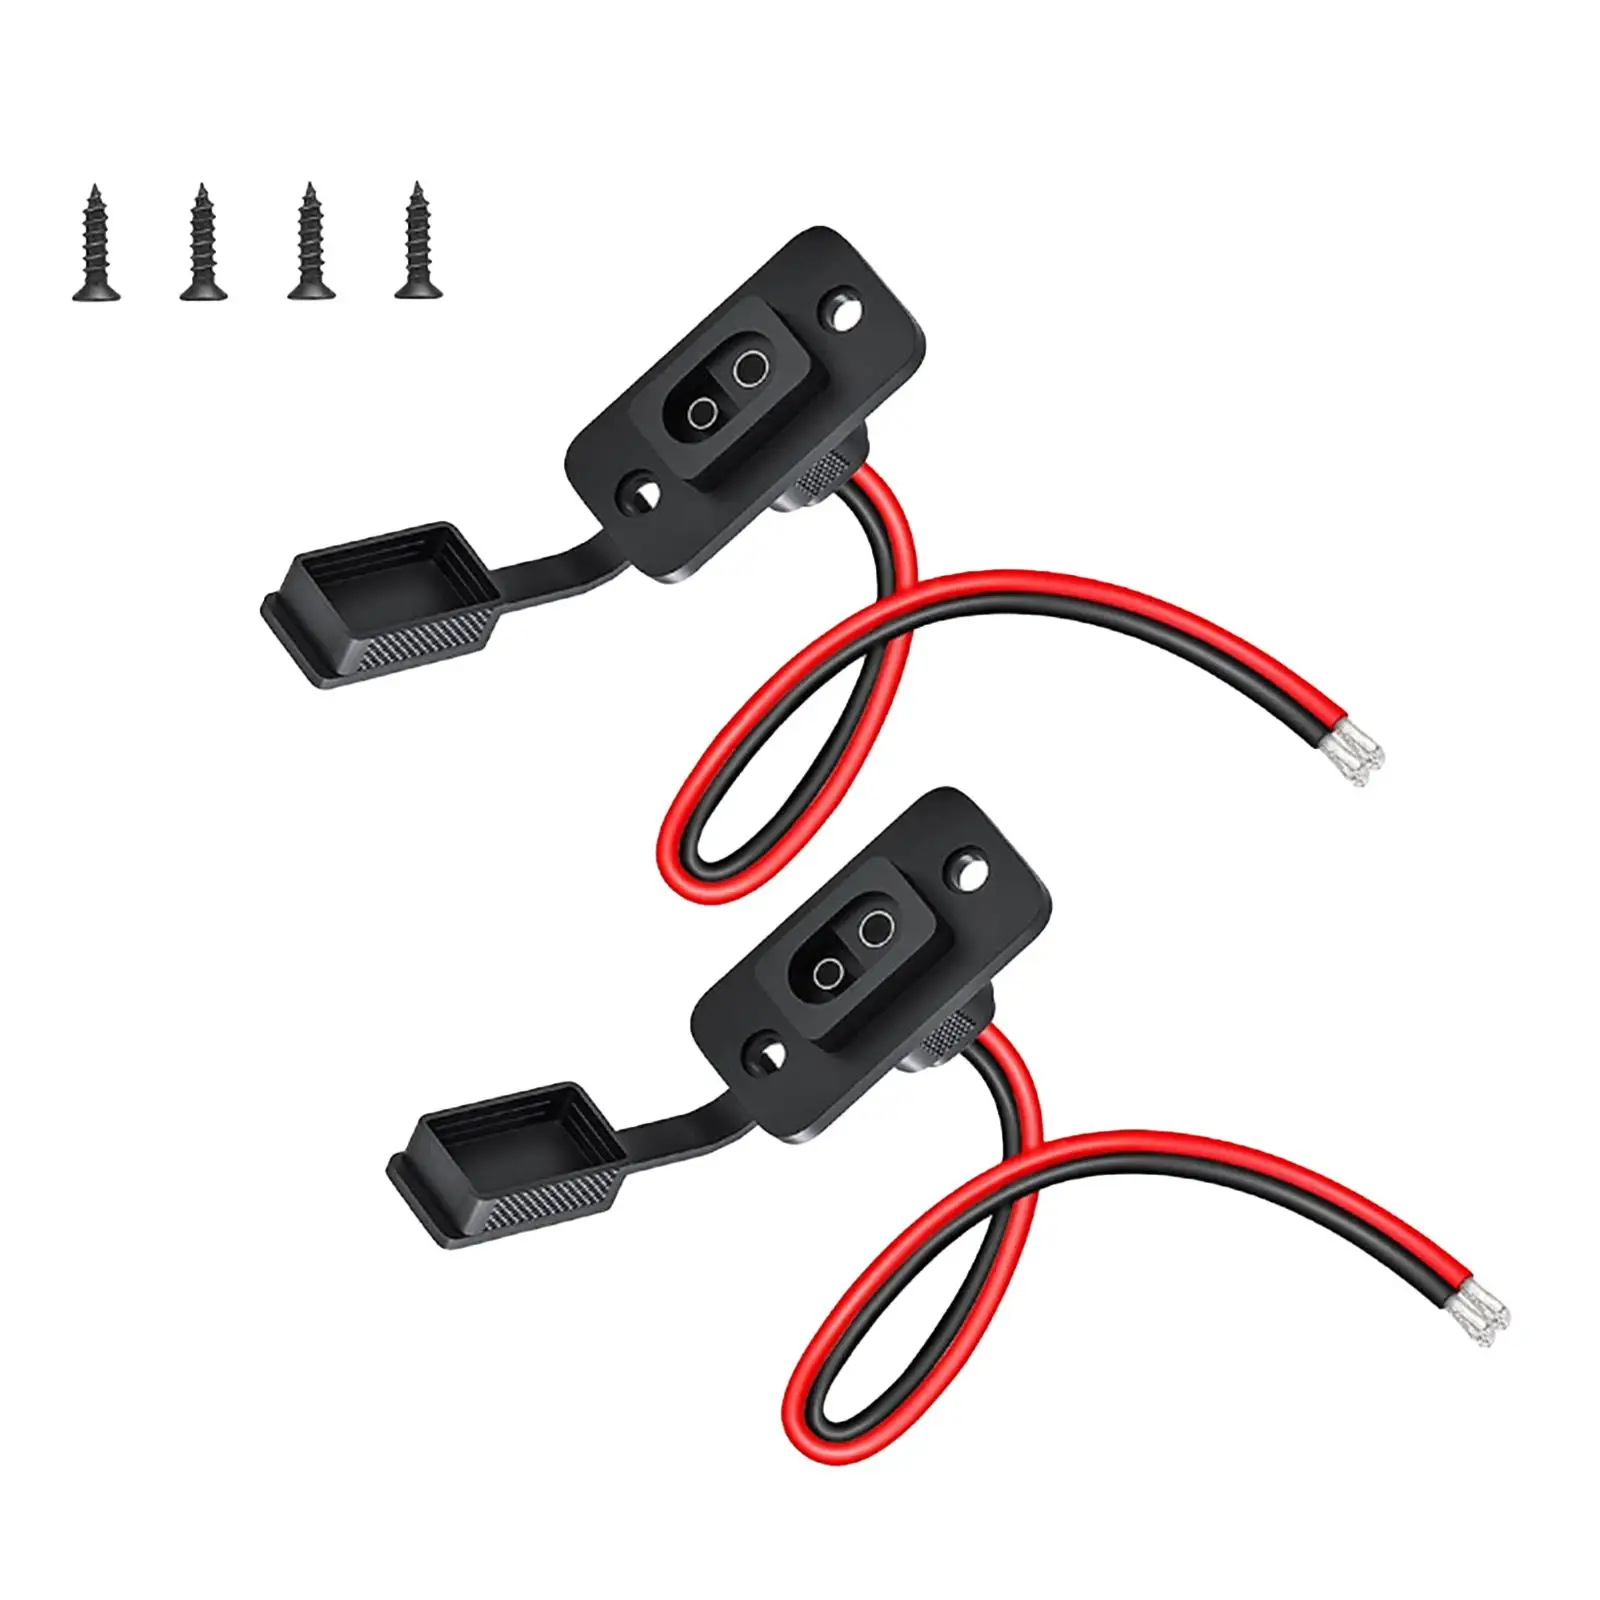 2x SAE Socket Weatherproof Motorcycle 12AWG SAE Connector Quick Connect Disconnect Solar Panel RV Boats Accessory Battery Cables